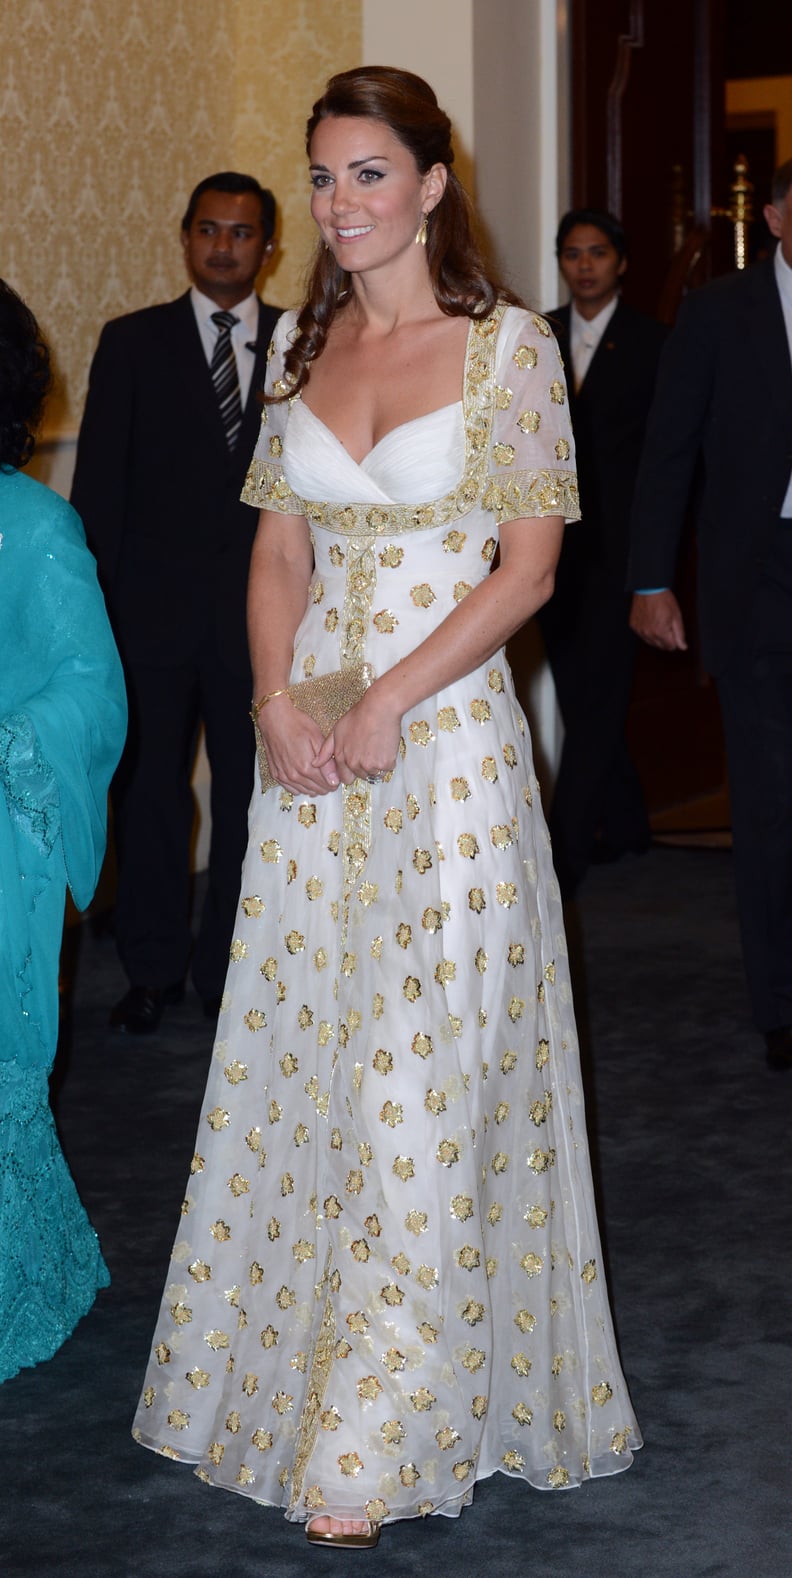 Kate Middleton Wearing Her Alexander McQueen Gown in Malaysia, 2012